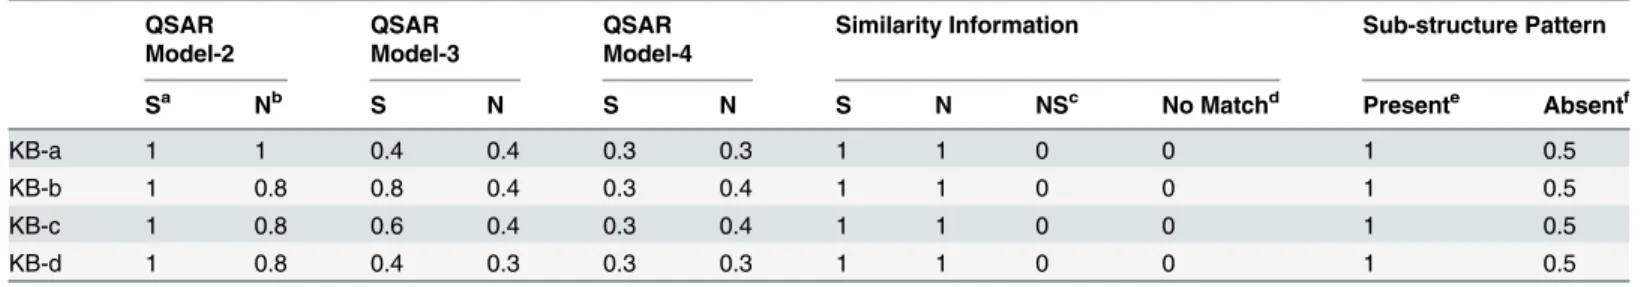 Table 2. Weights used for components of prediction workflows in knowledge-based optimization.